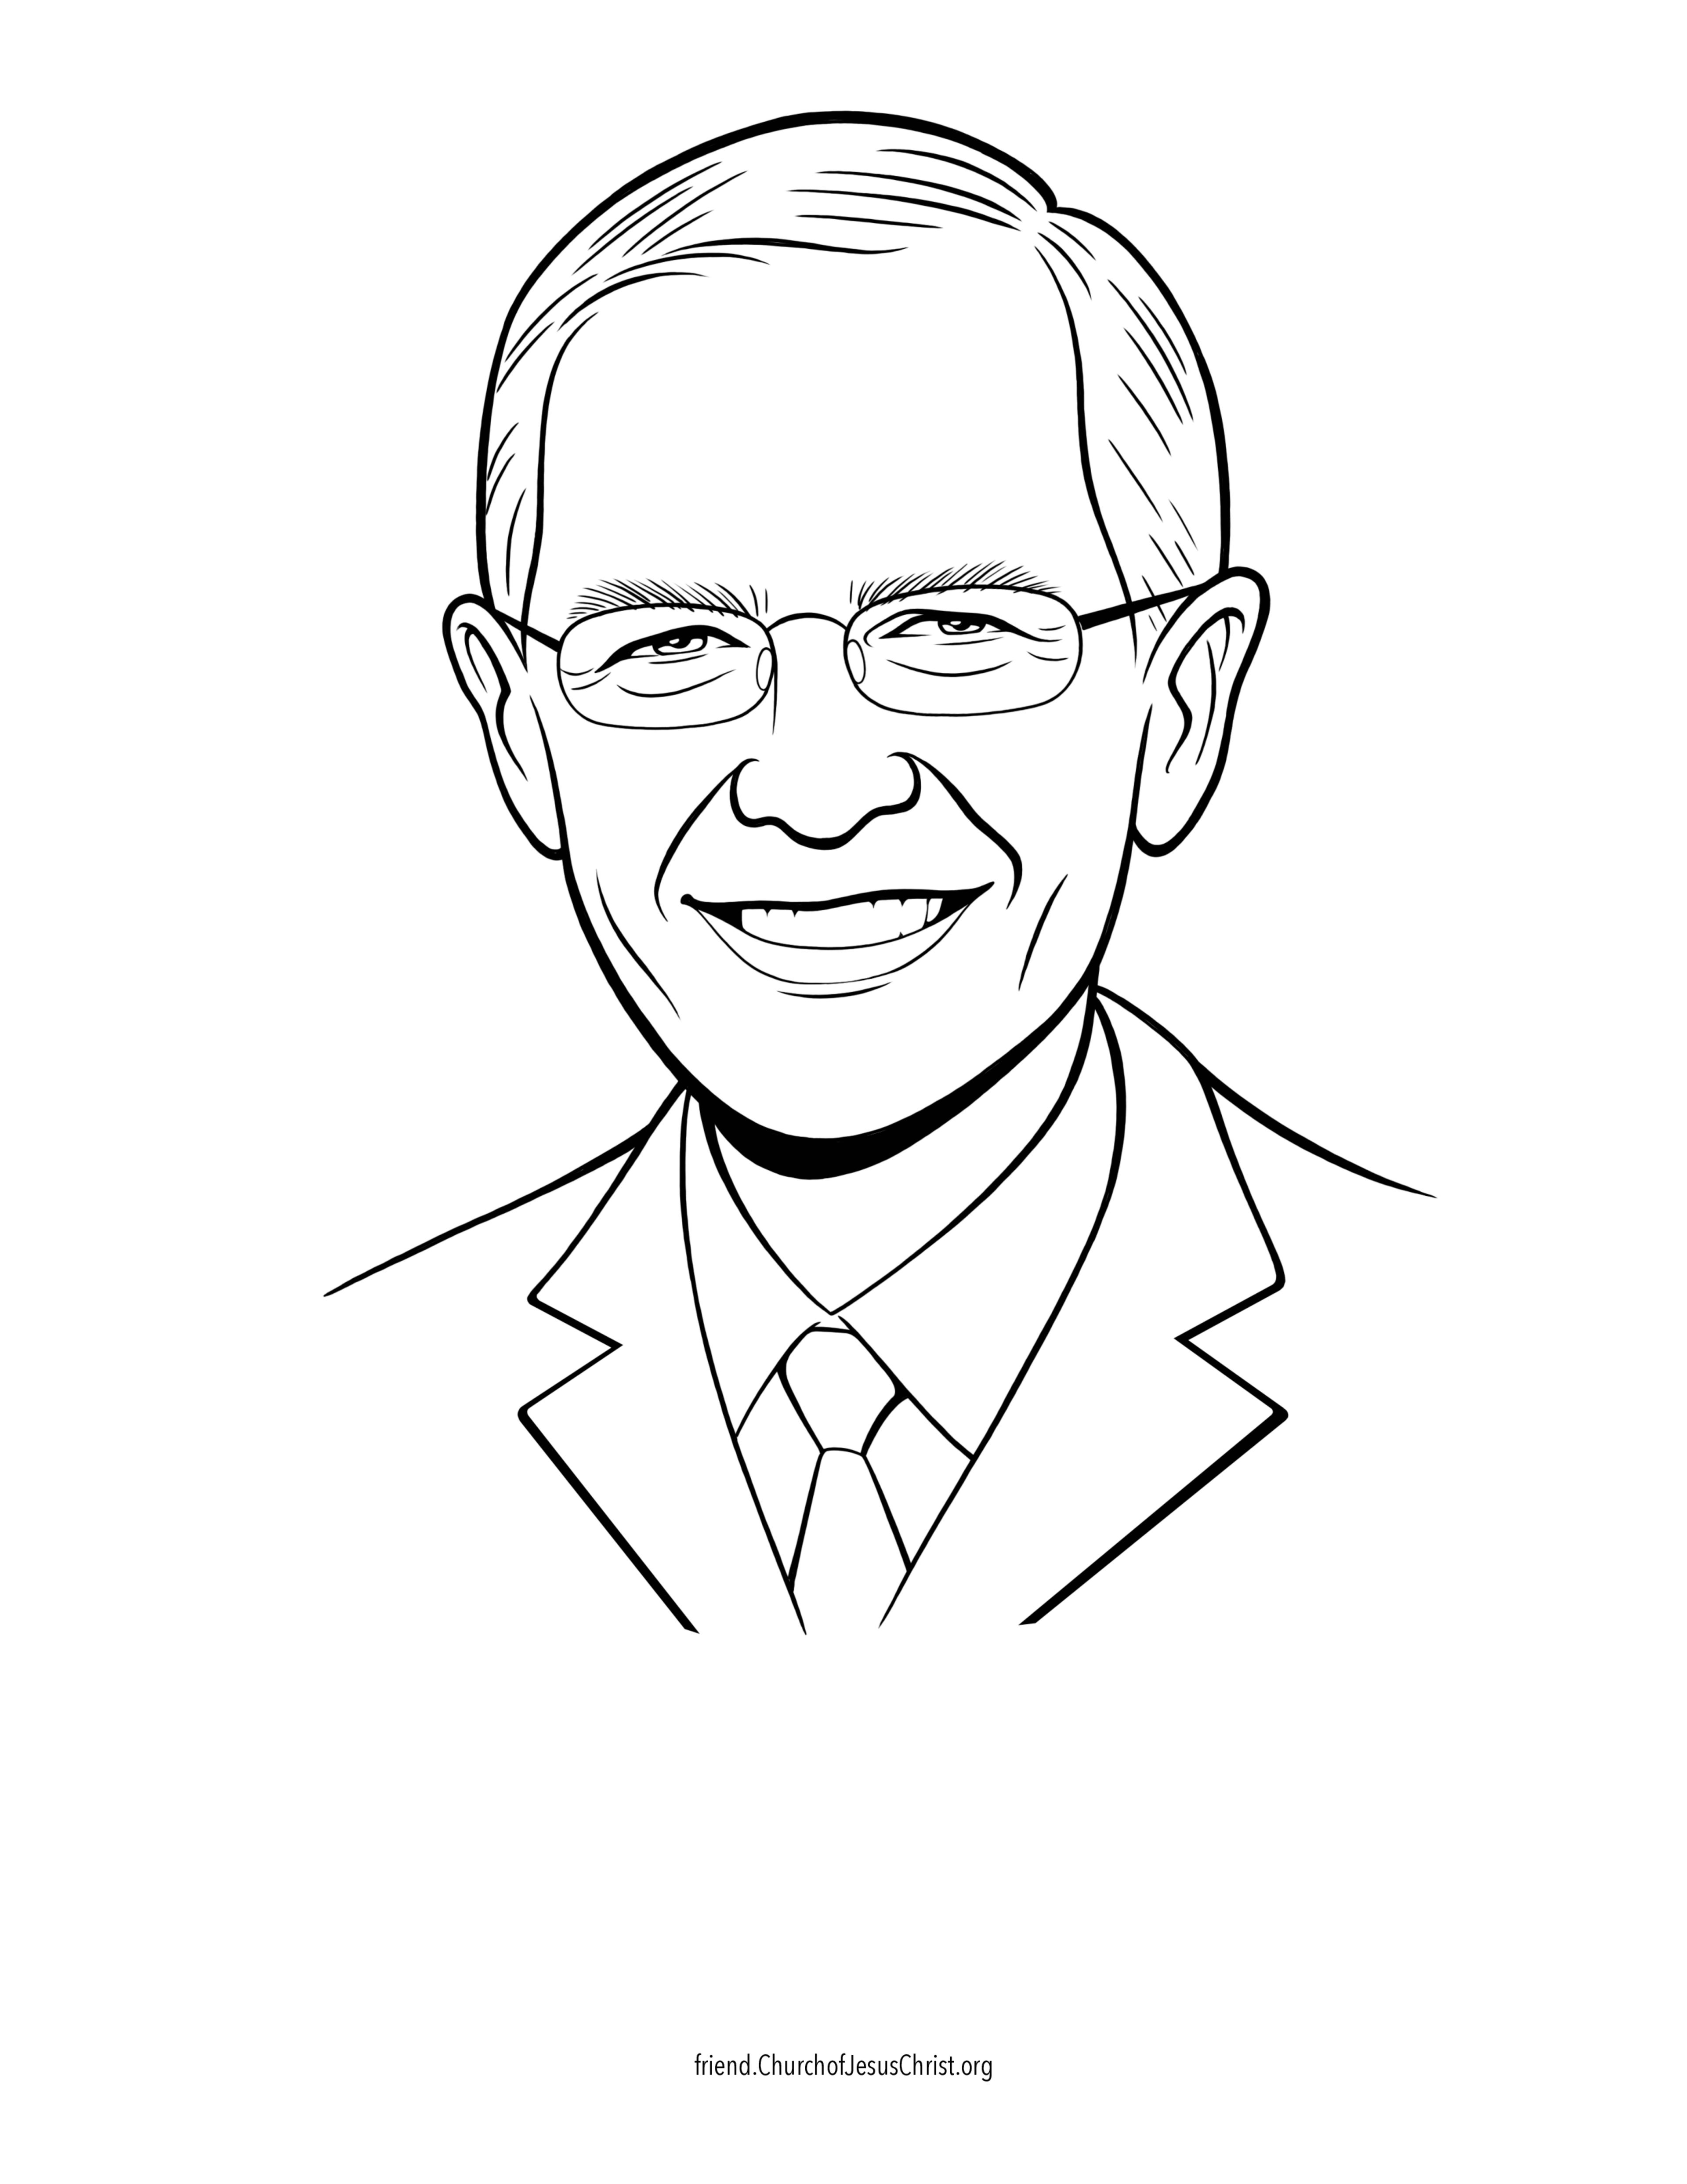 A coloring page of the official portrait of Neil L. Andersen.